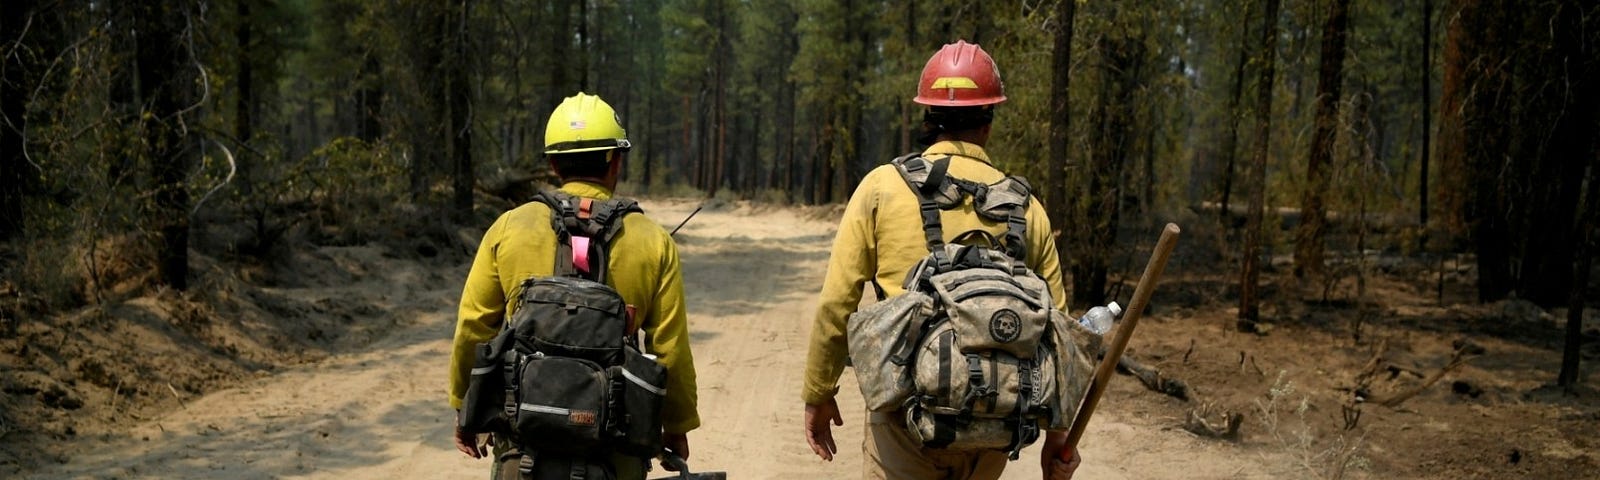 Firefighters mop up hotspots in the northwestern section of the Bootleg Fire as it expands to over 210,000 acres, Klamath Falls, Oregon, July 14, 2021. Photo by Mathieu Lewis-Rolland/Reuters